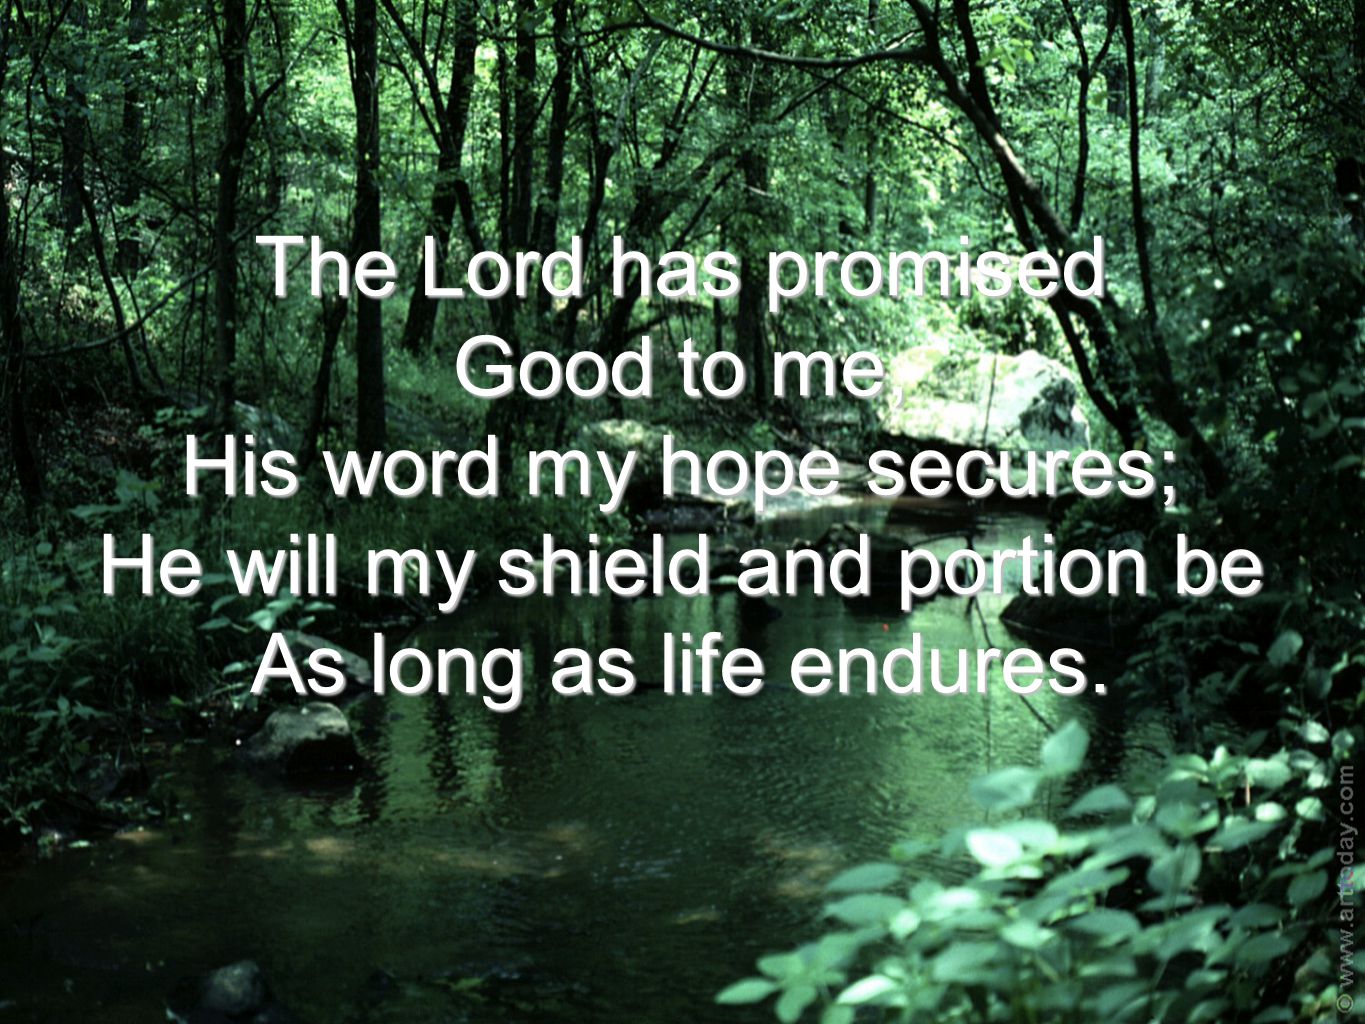 The Lord has promised Good to me, His word my hope secures; He will my shield and portion be As long as life endures.